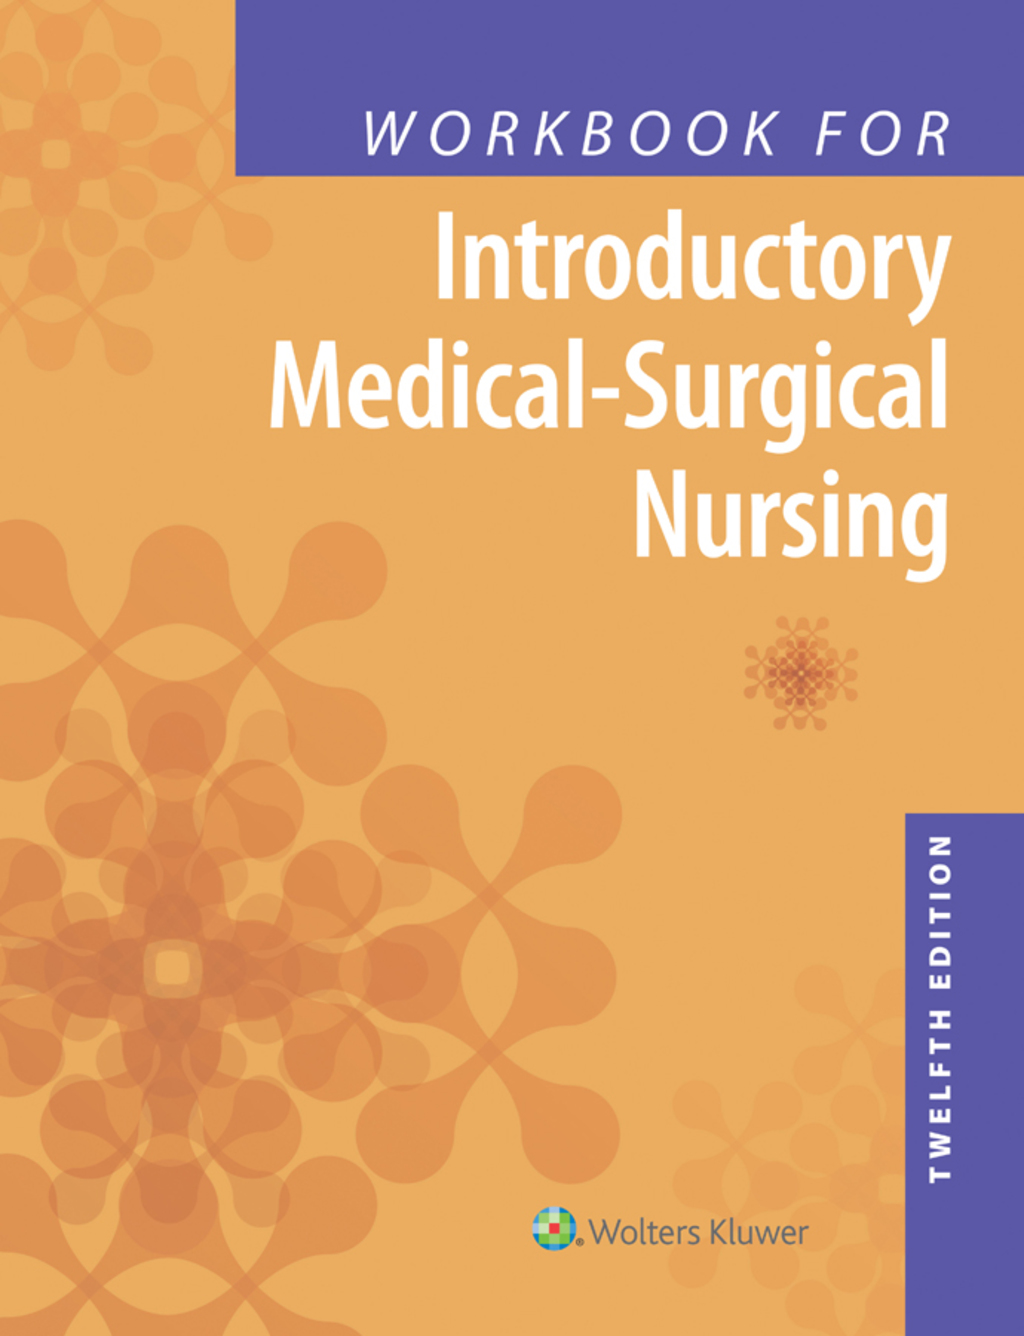 Workbook for Introductory Medical-Surgical Nursing - 12th Edition (eBook)